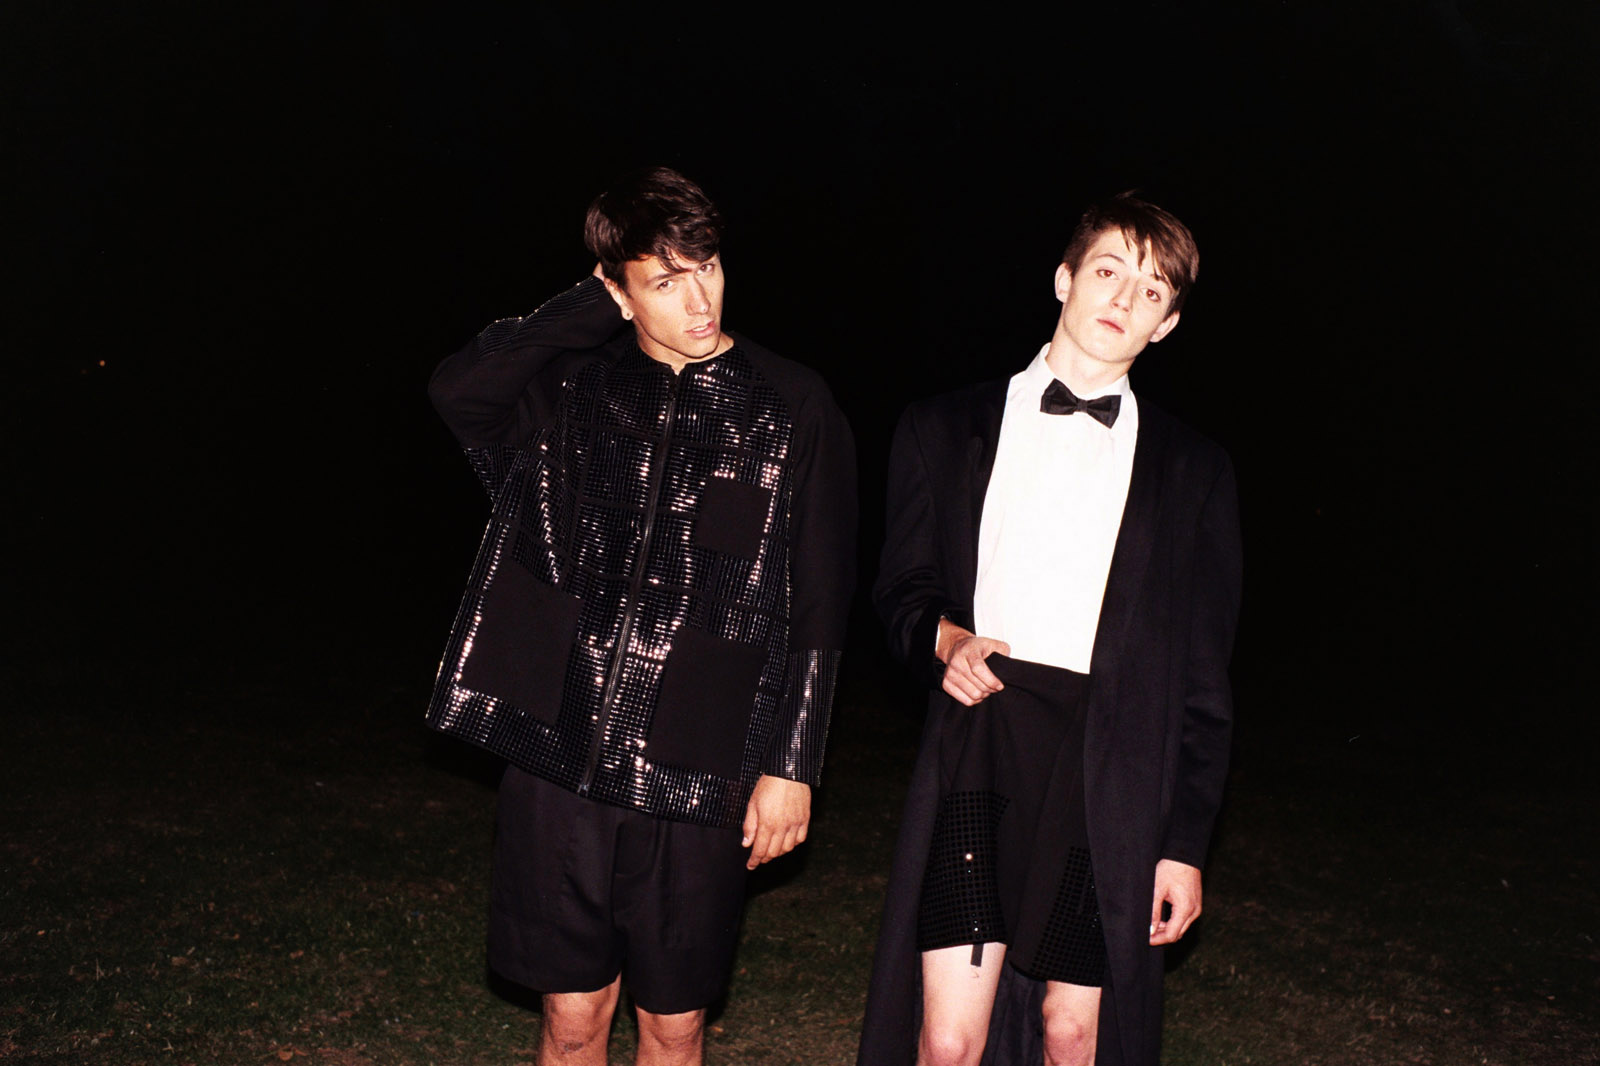 INTO THE NIGHT by Paolo Colaiocco for CHASSEUR MAGAZINE ISSUE #6